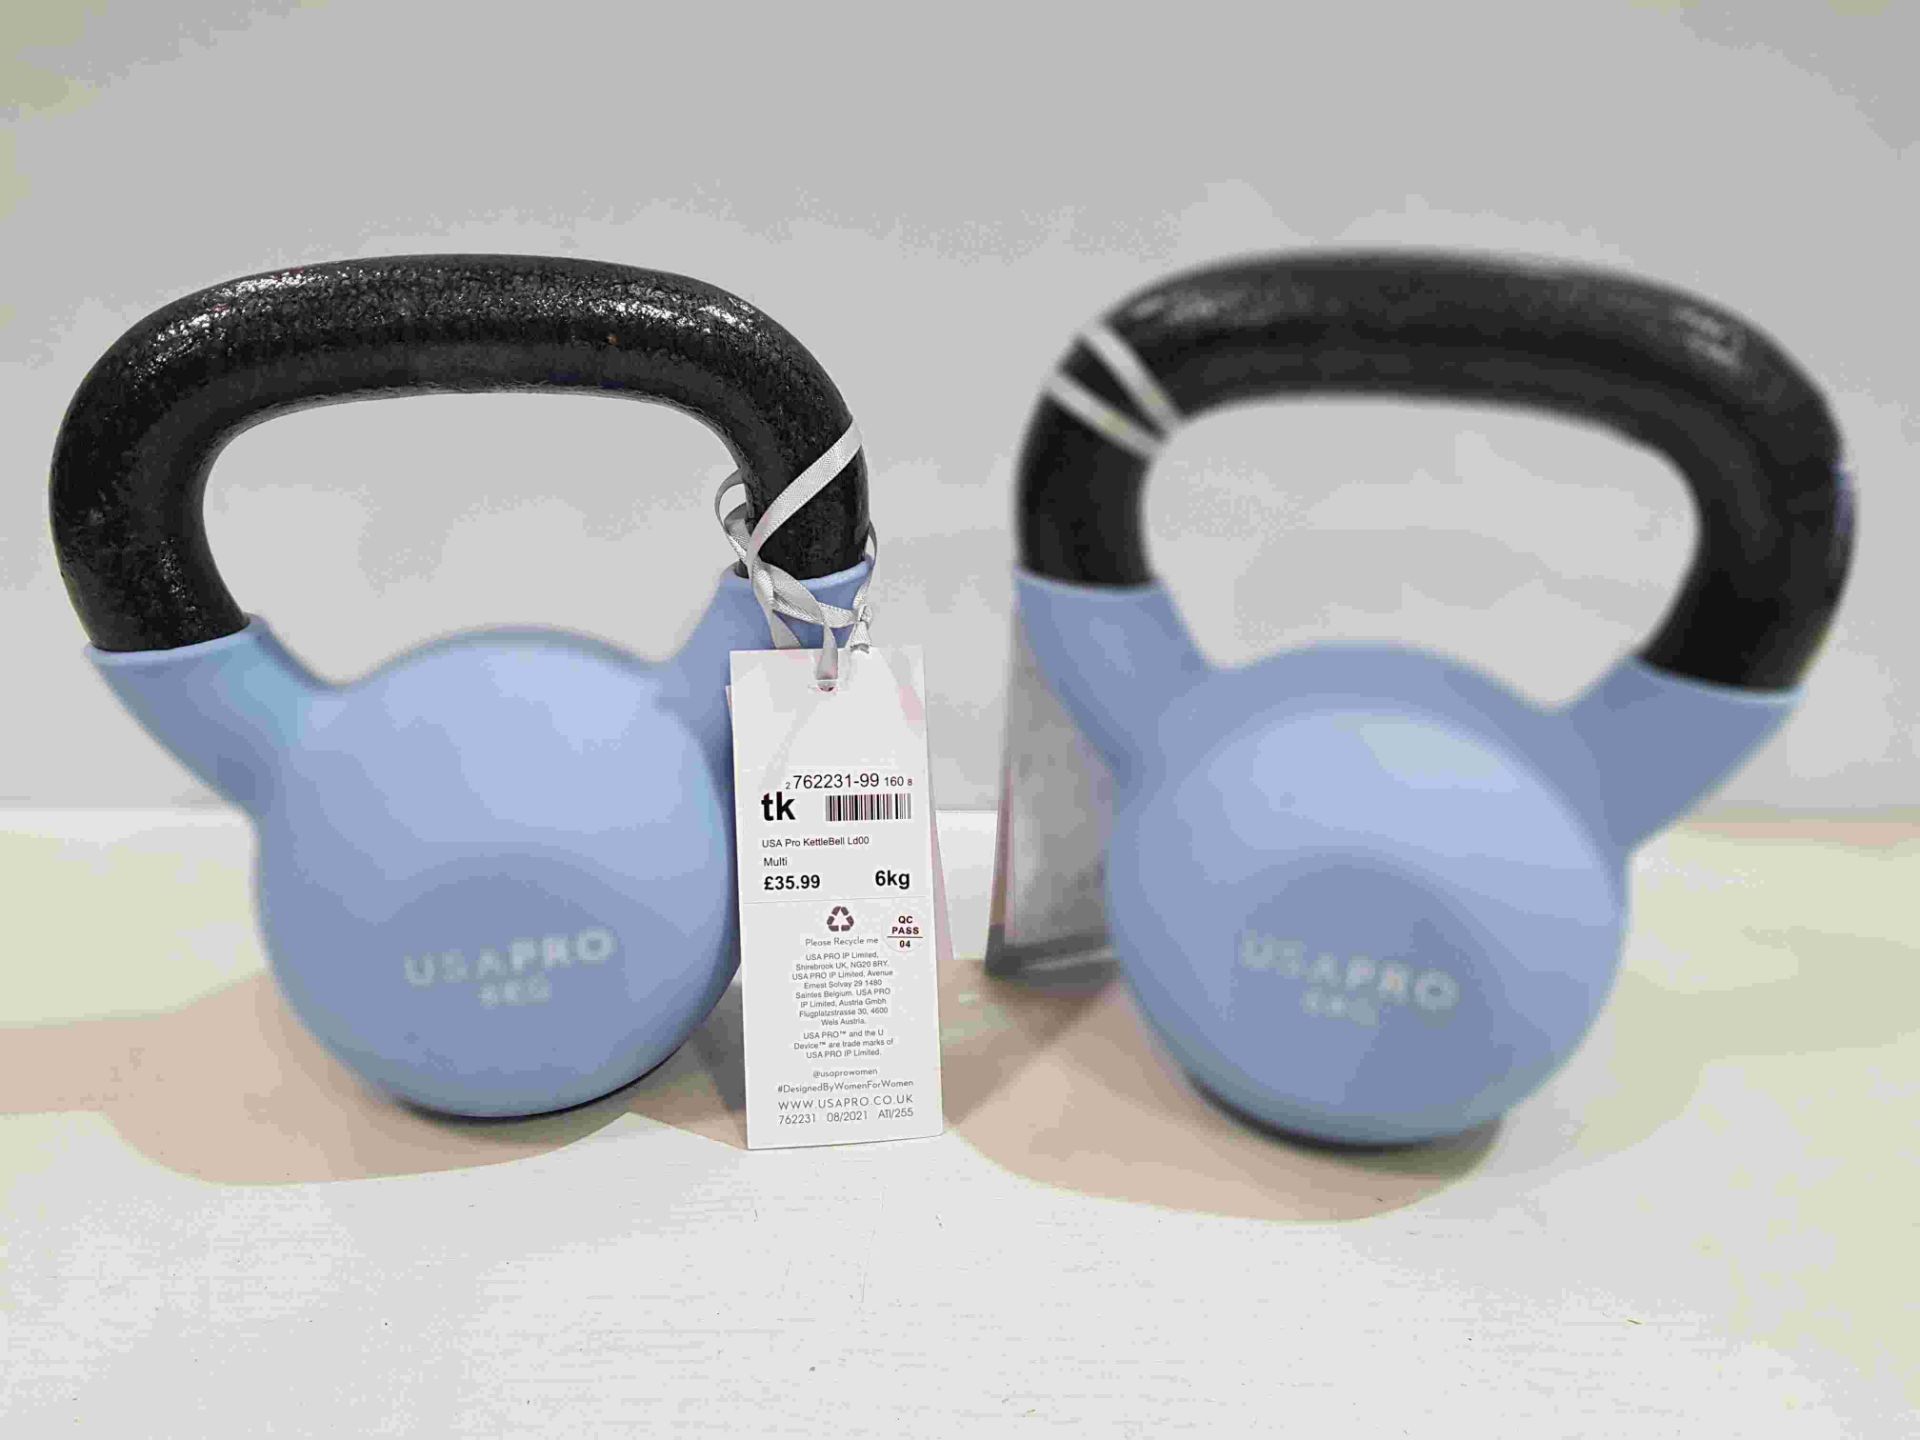 20 X BRAND NEW PAIRS OF 2 USA PRO KETTLEBELLS 6KG